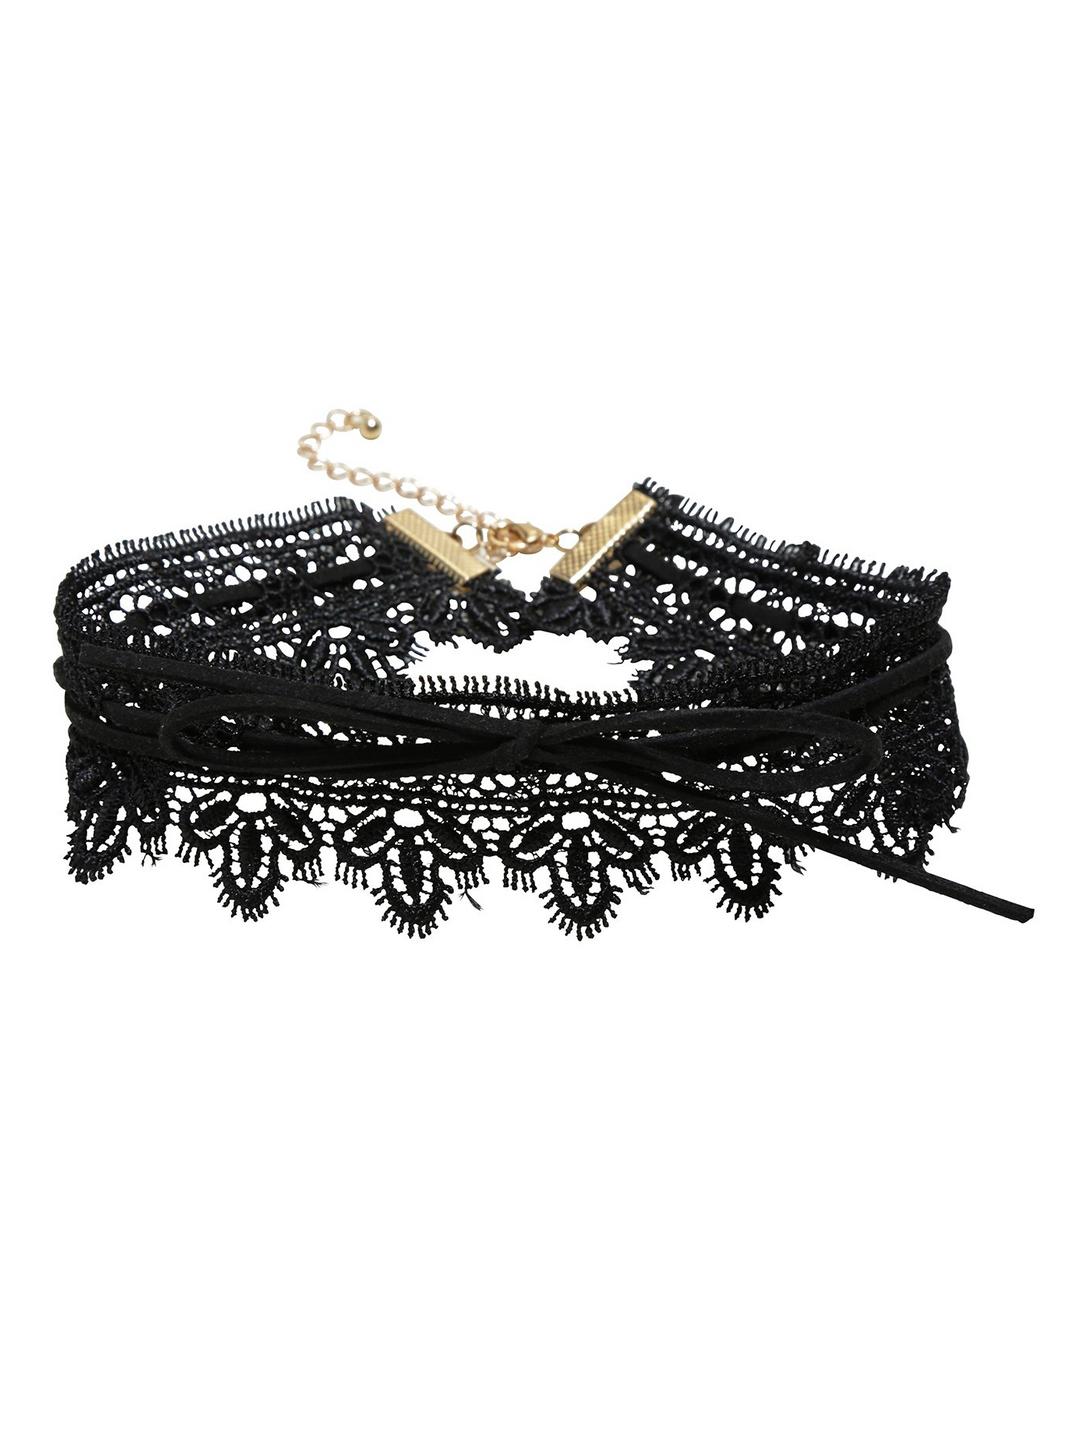 Blackheart Black Lace & Suede Bow Choker | Hot Topic